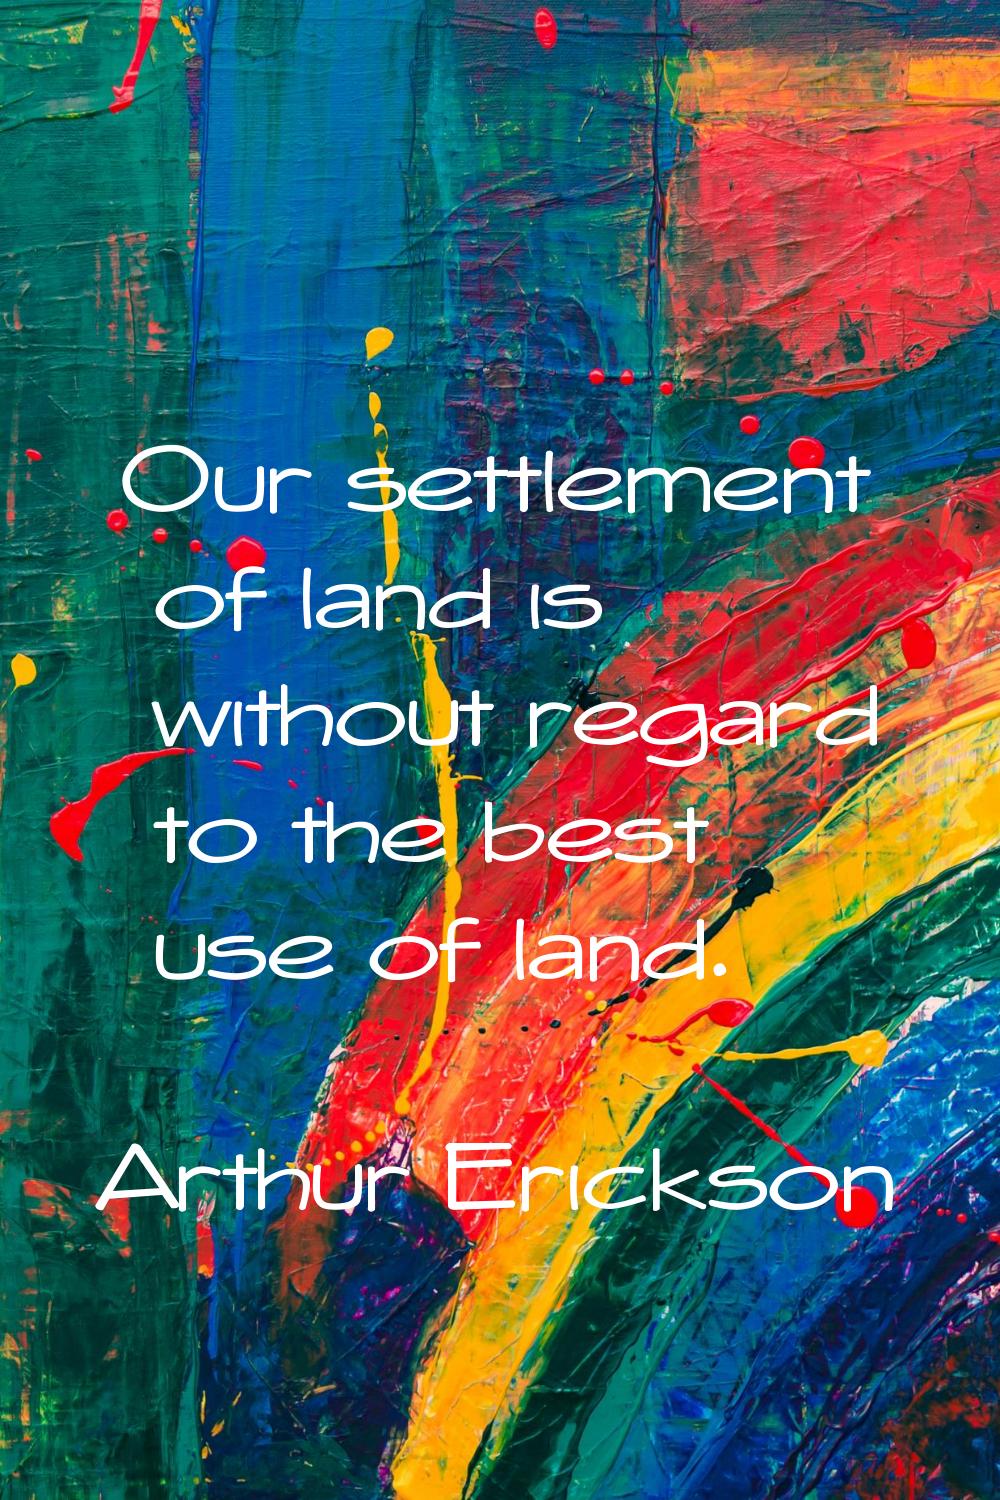 Our settlement of land is without regard to the best use of land.